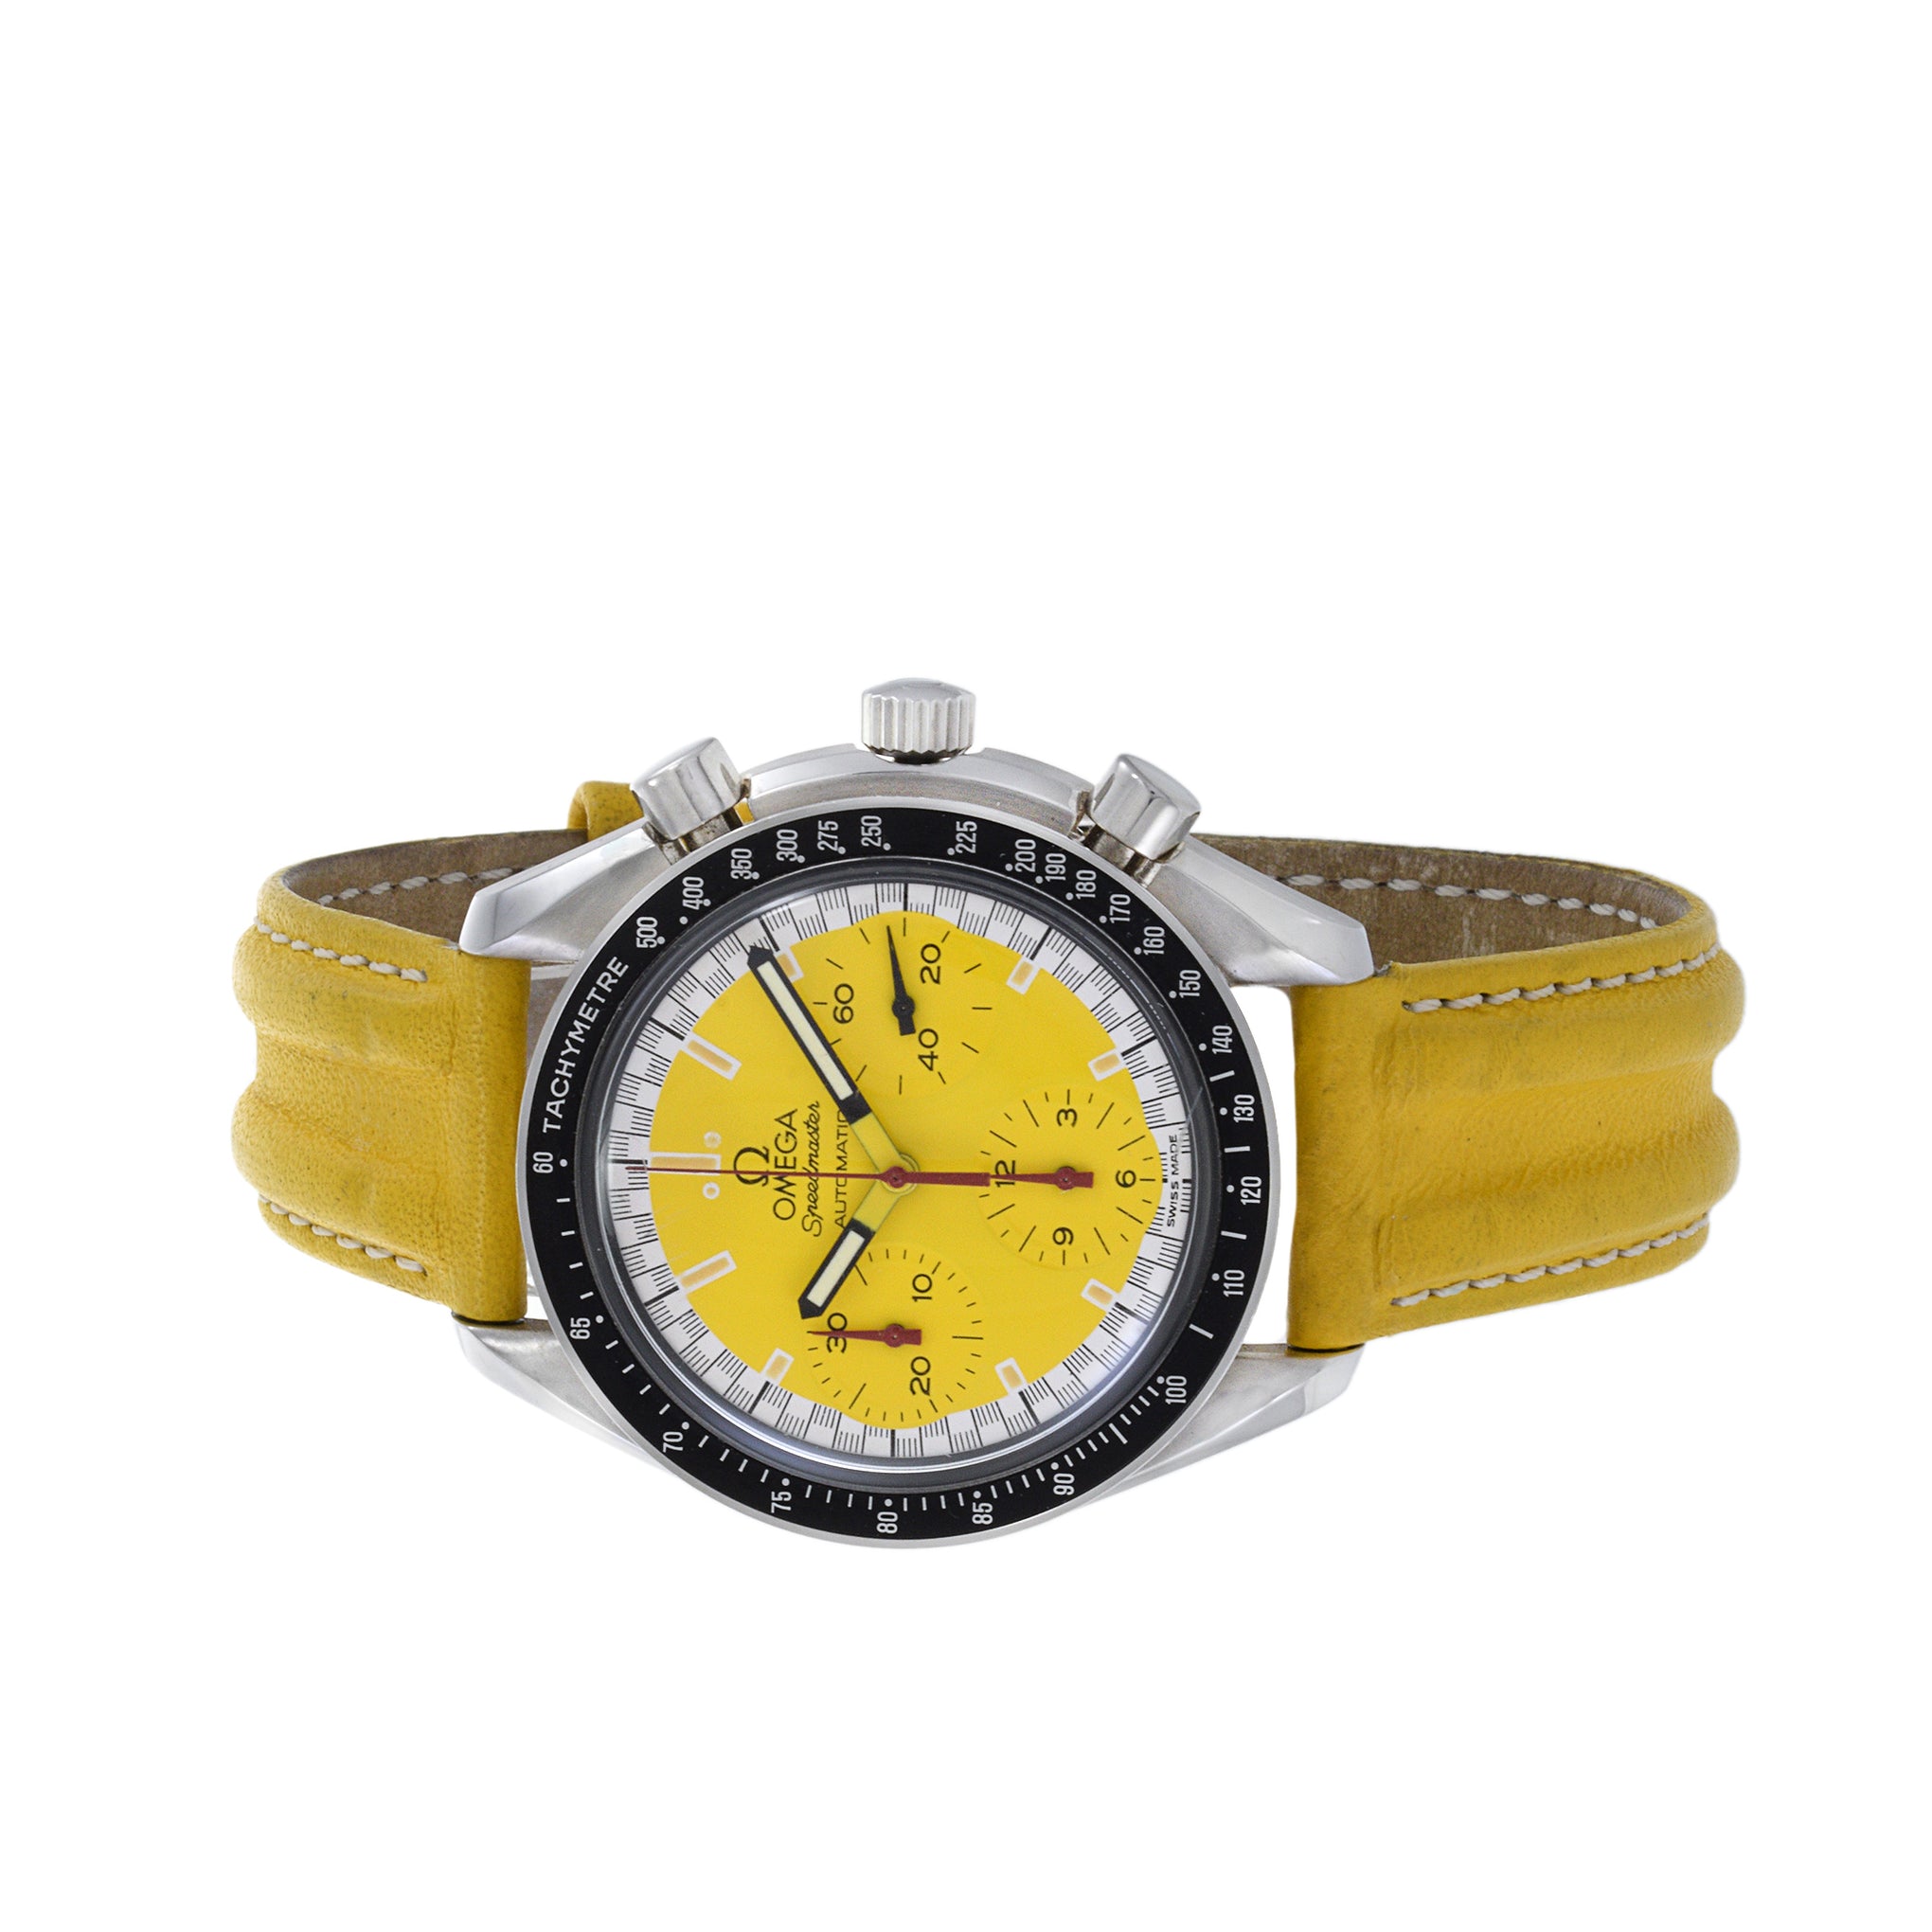 Omega Speedmaster Reference 3810.12.40 Special Racing Yellow Edition Automatic